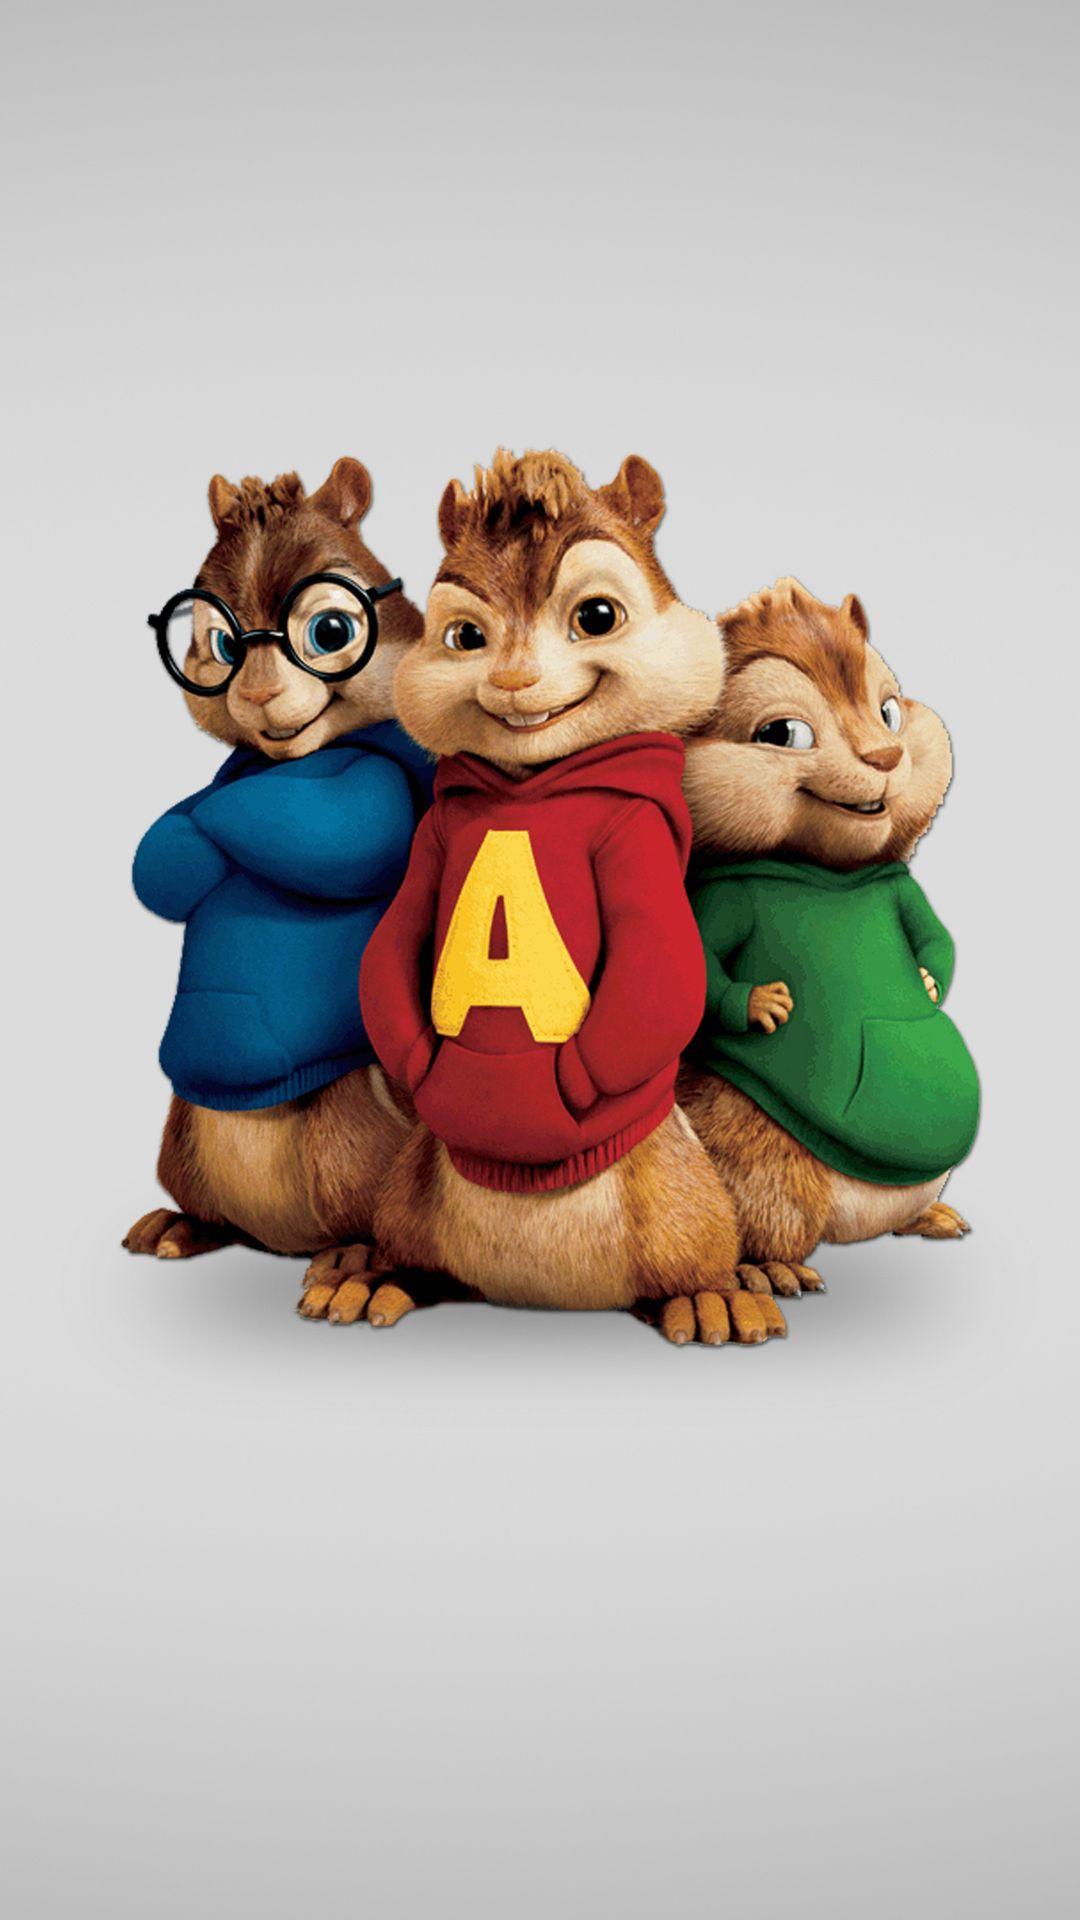 Alvin and the chipmunks htc one wallpaper htc one wallpaper